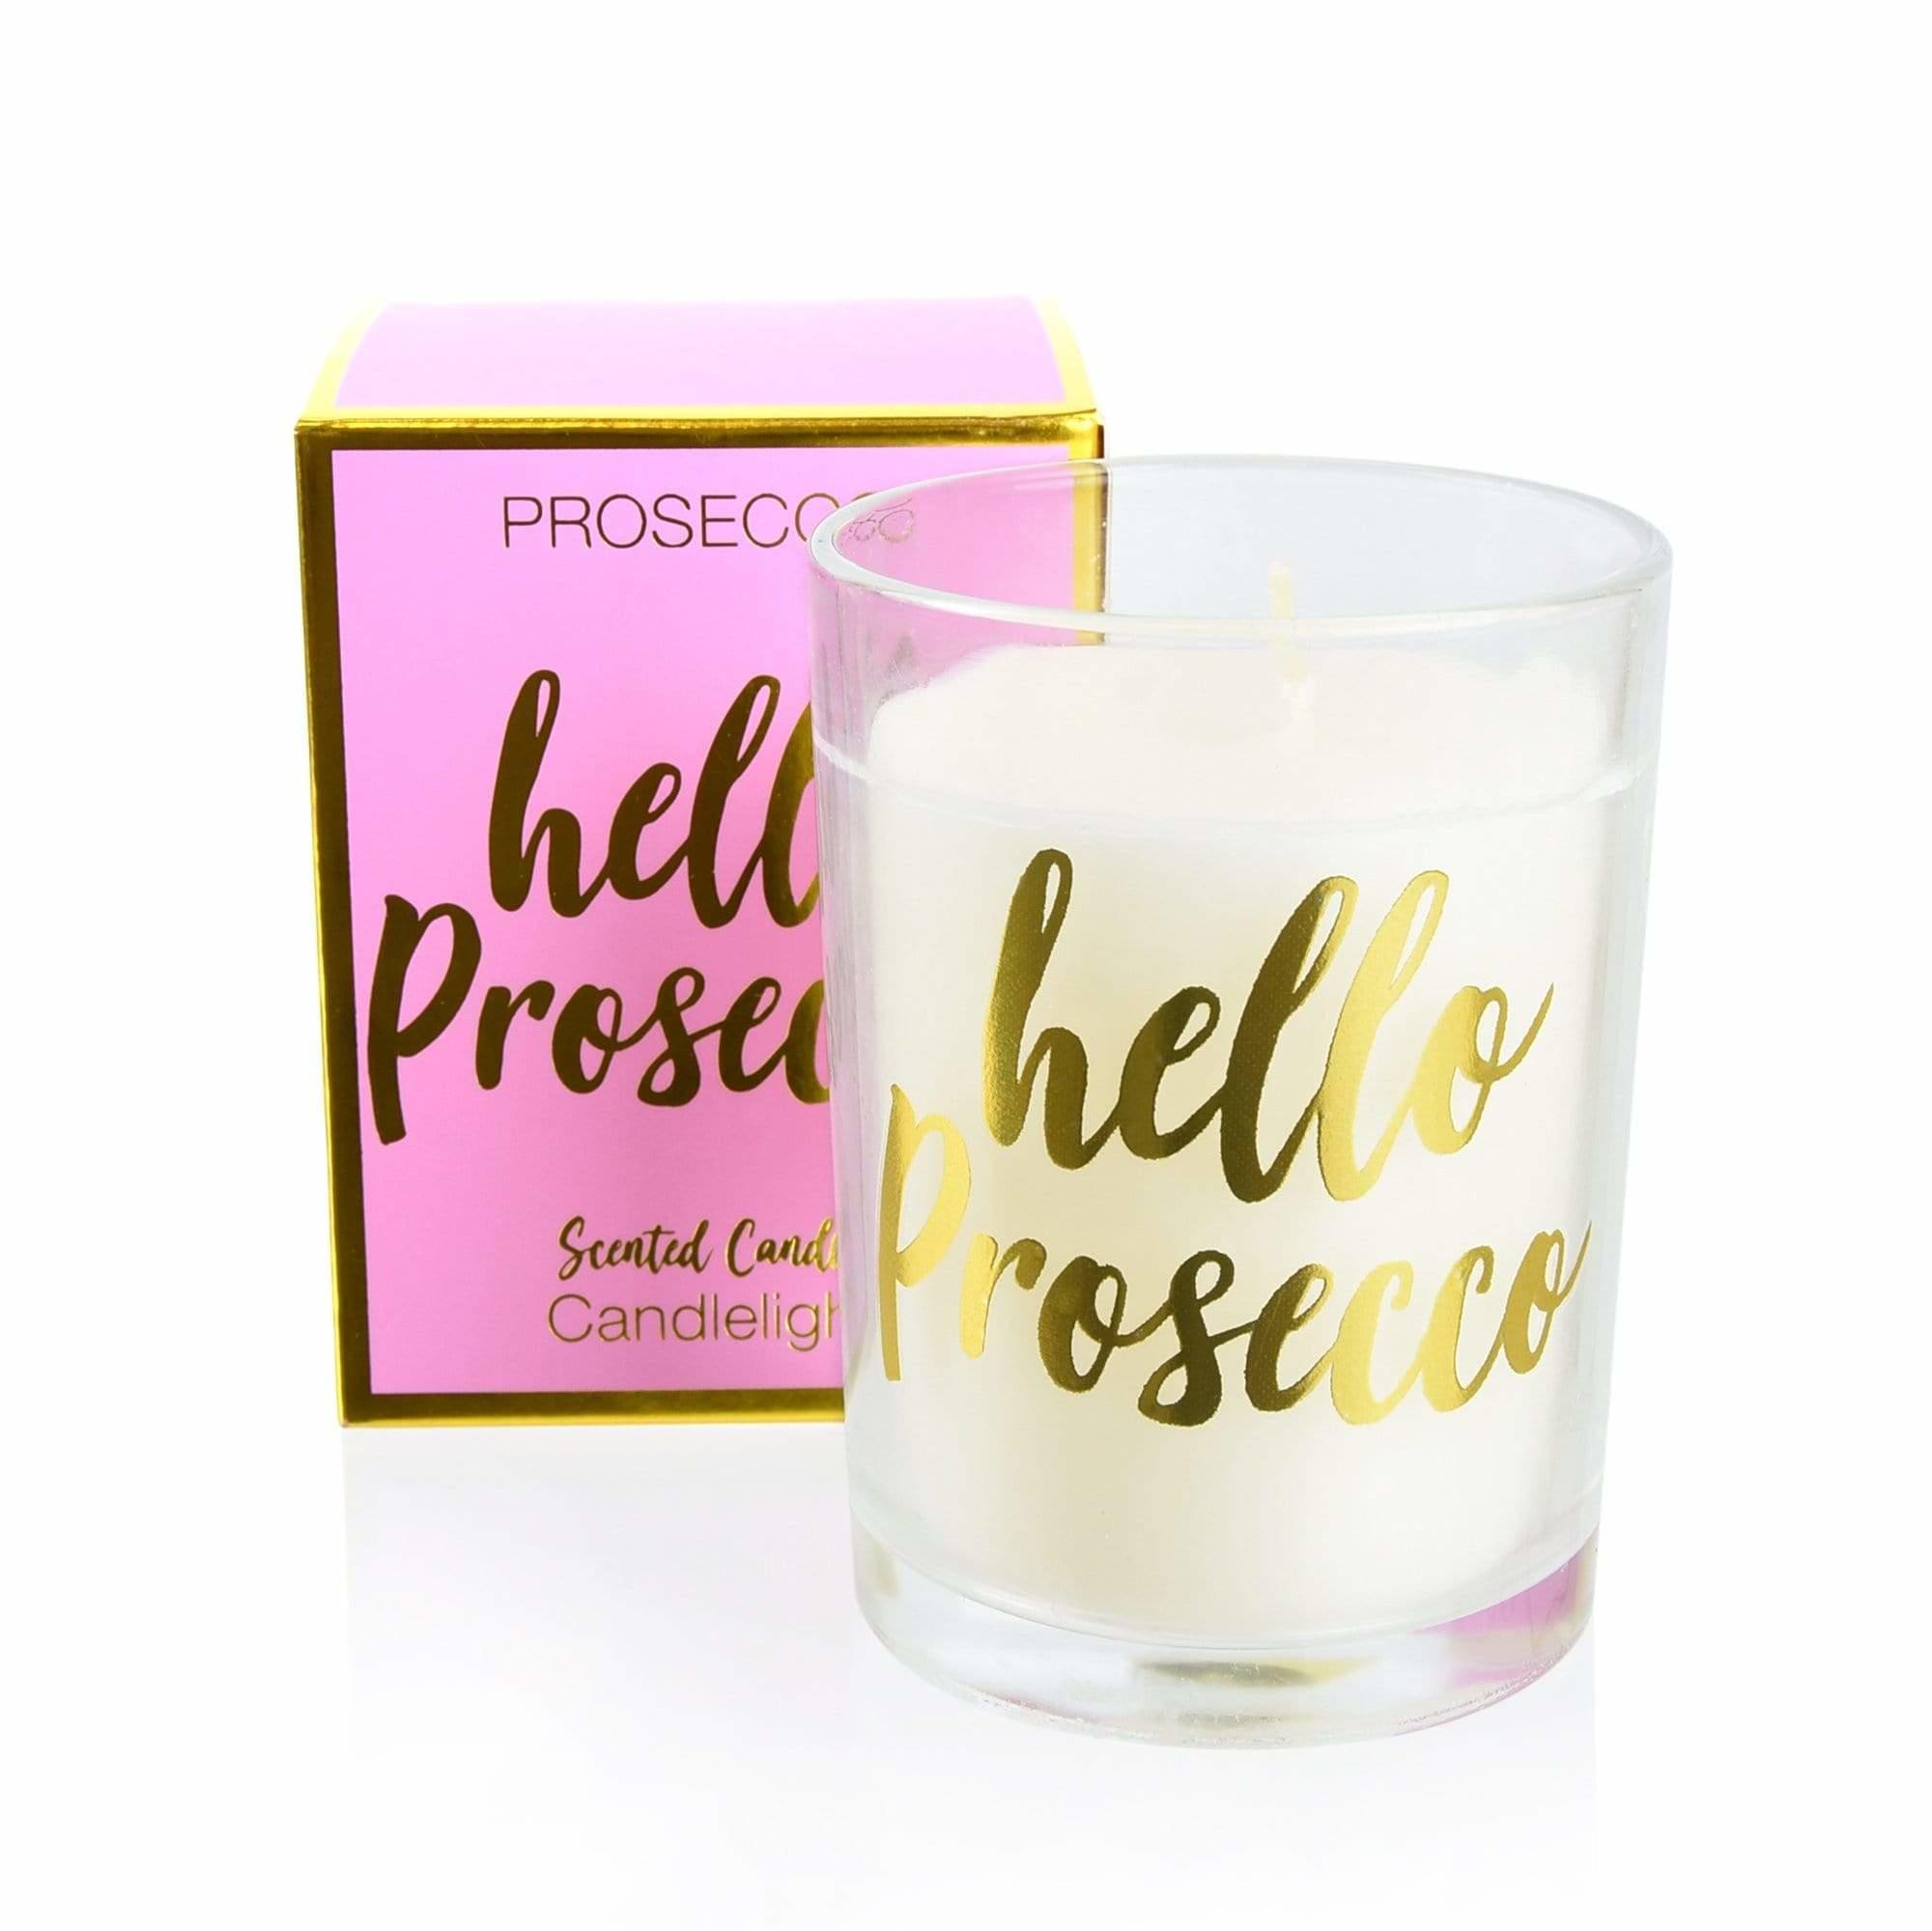 prosecco candle uk